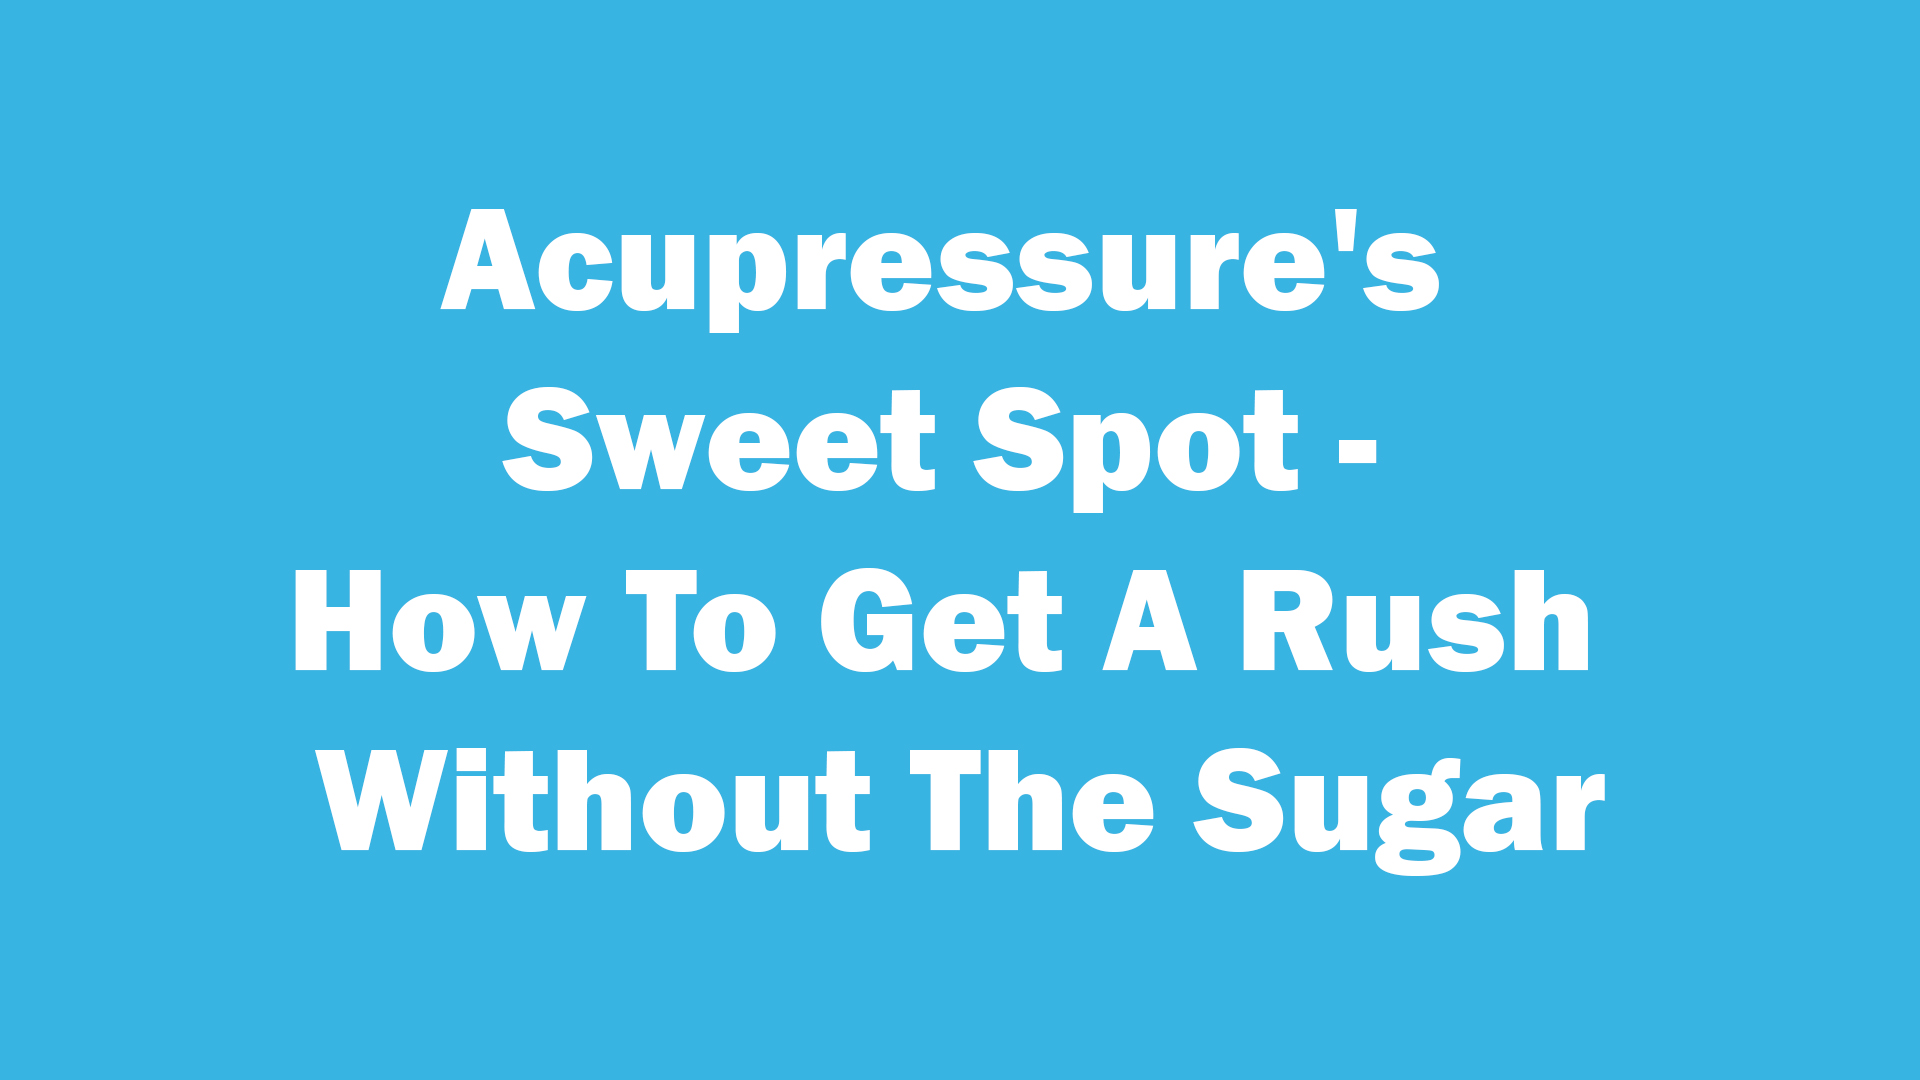 Acupressure's Sweet Spot - How To Get A Rush Without The Sugar